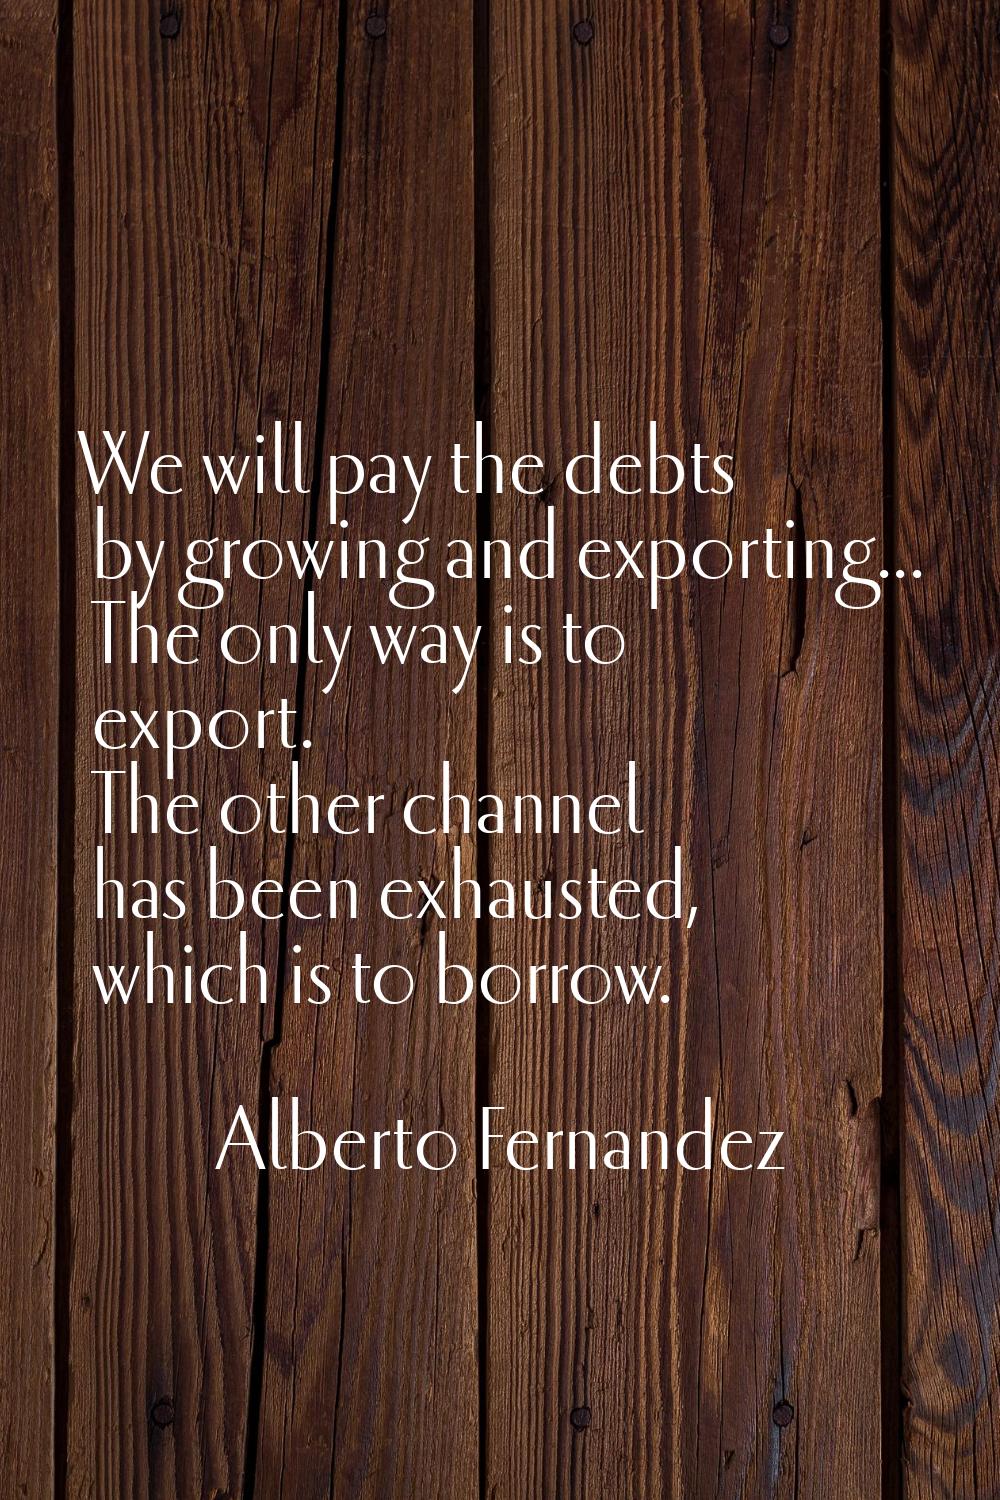 We will pay the debts by growing and exporting... The only way is to export. The other channel has 